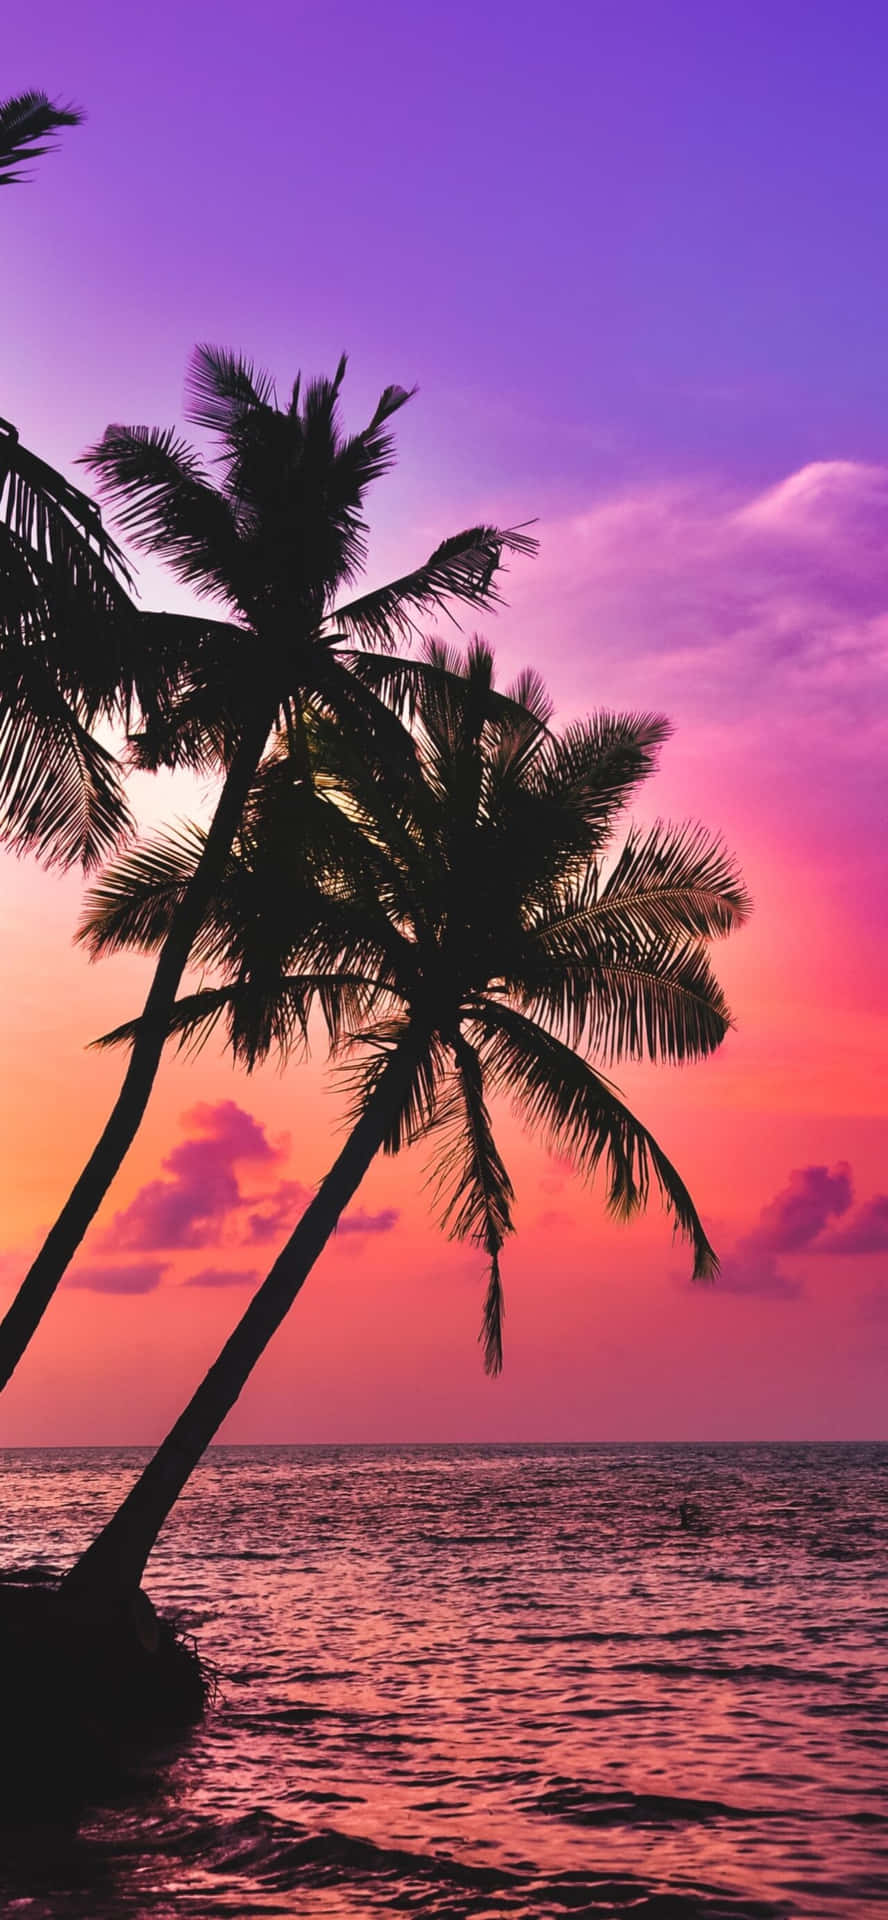 Palm Trees In The Ocean At Sunset